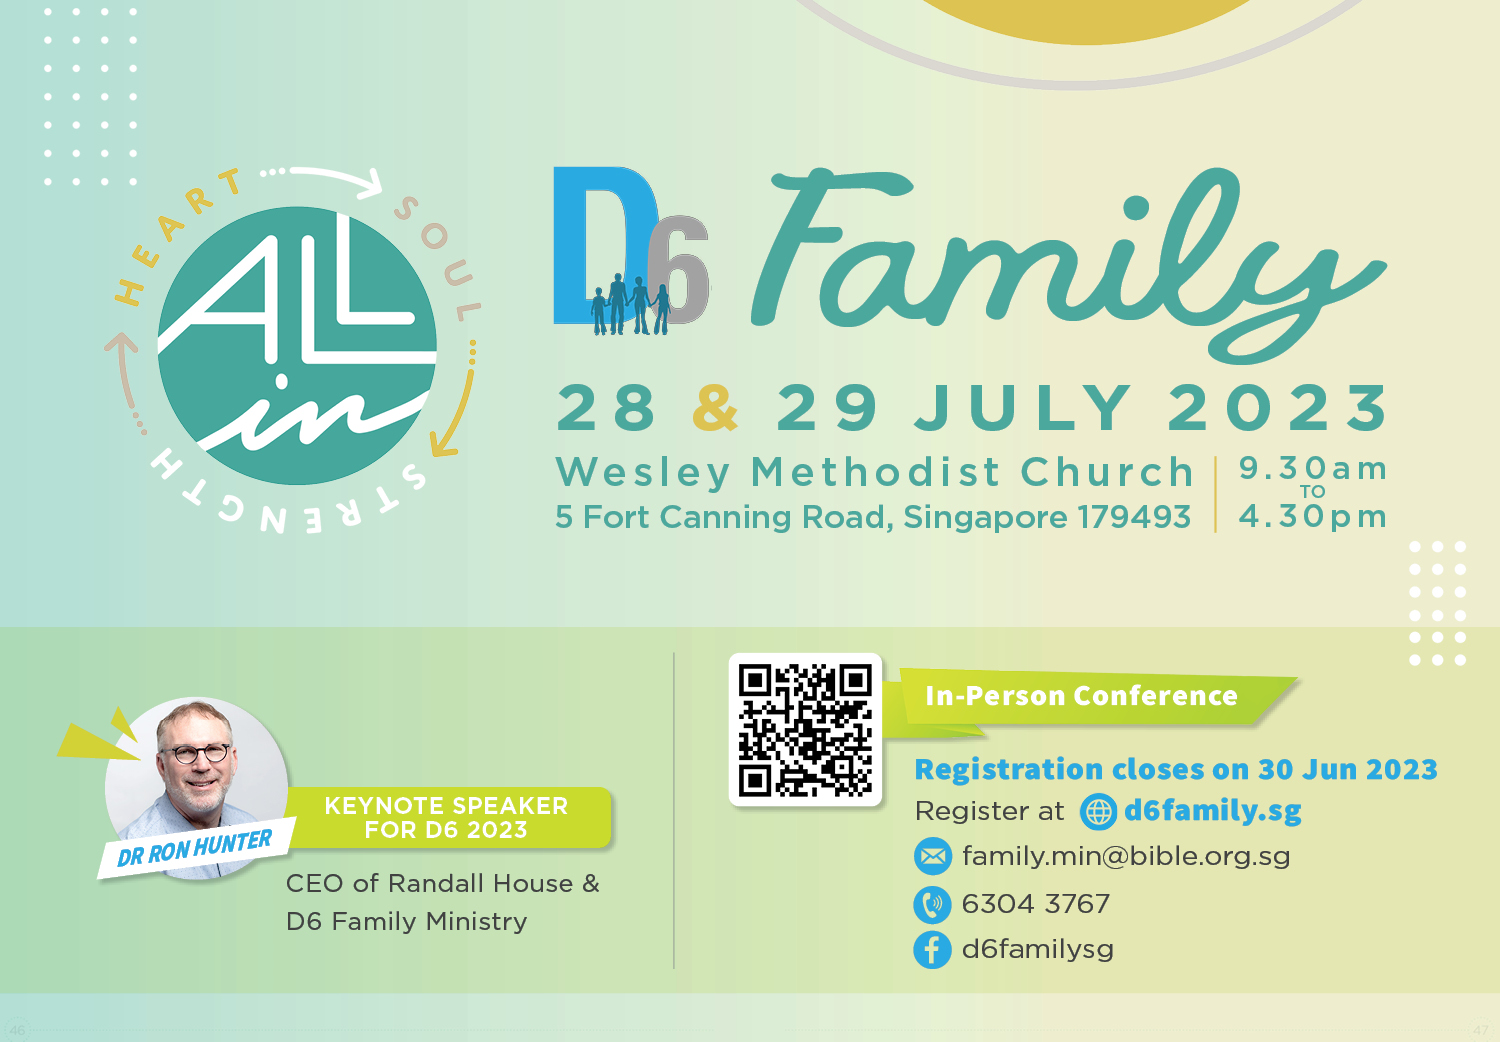 <strong>D6 Family Conference 2023 - Individual</strong>